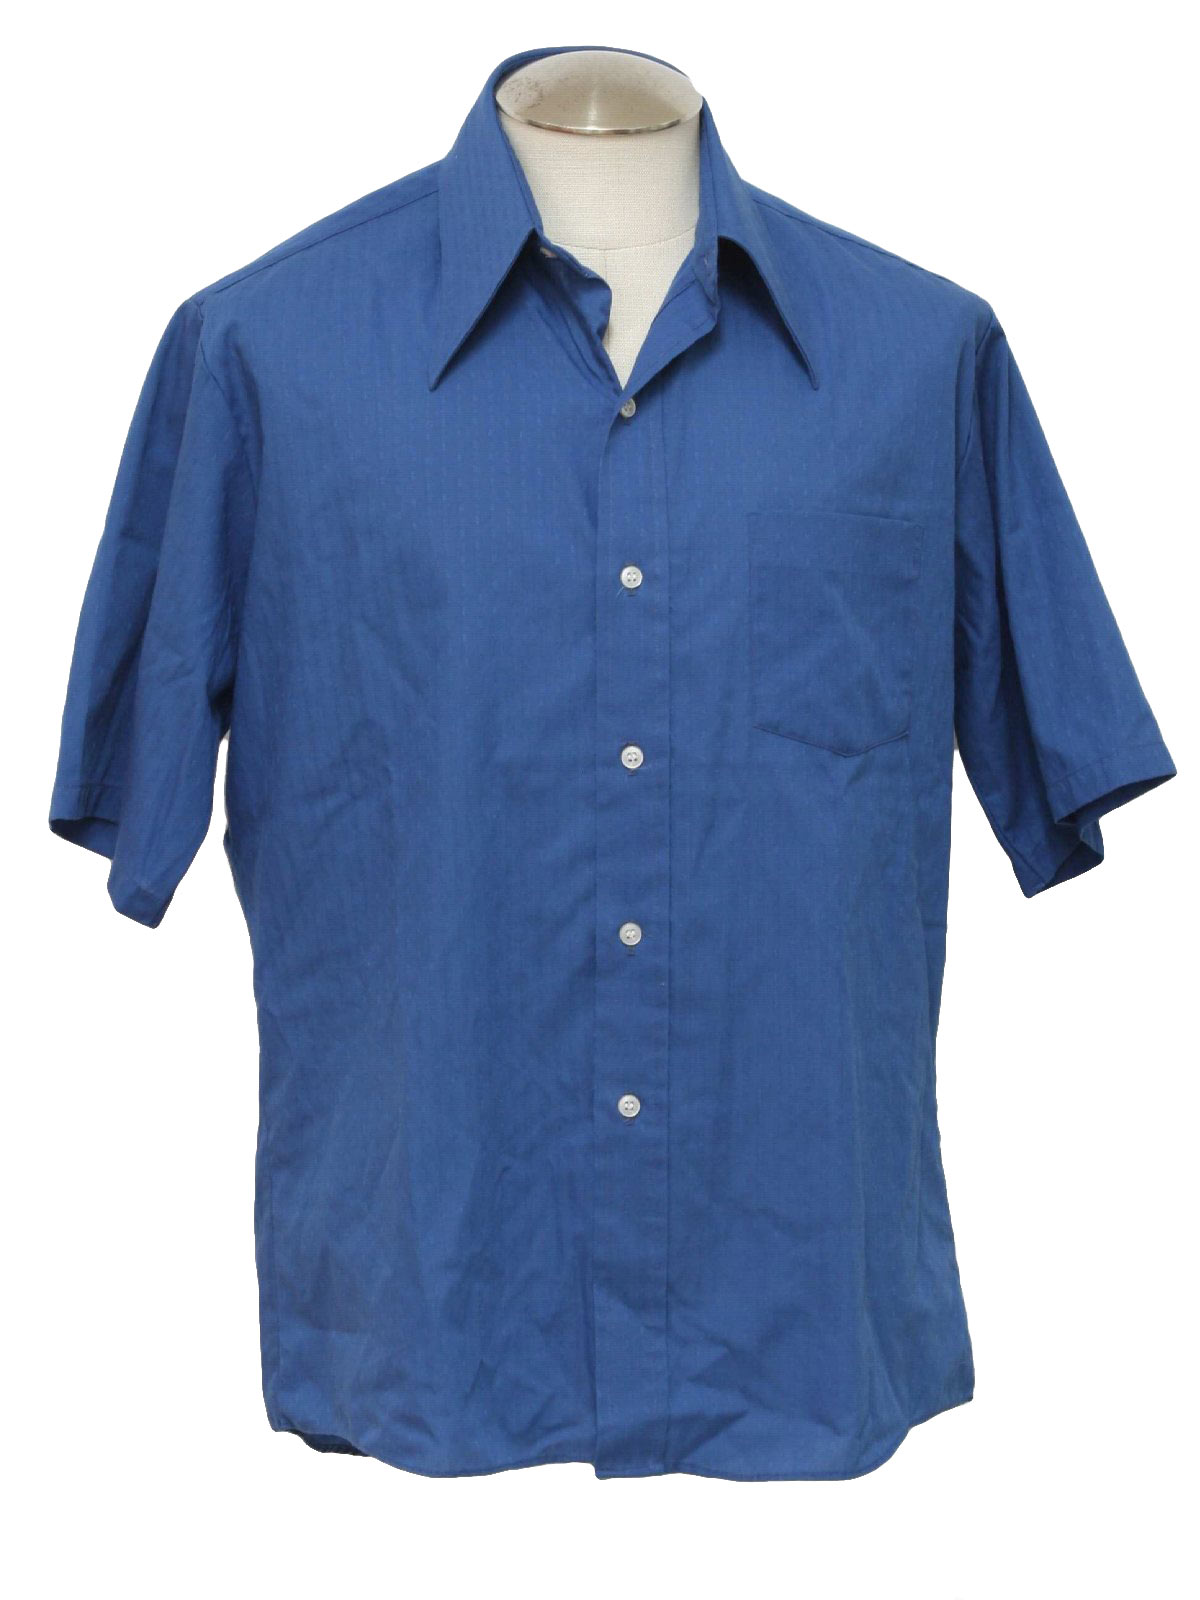 Vintage Sears 70's Shirt: 70s -Sears- Mens sapphire blue cotton and ...